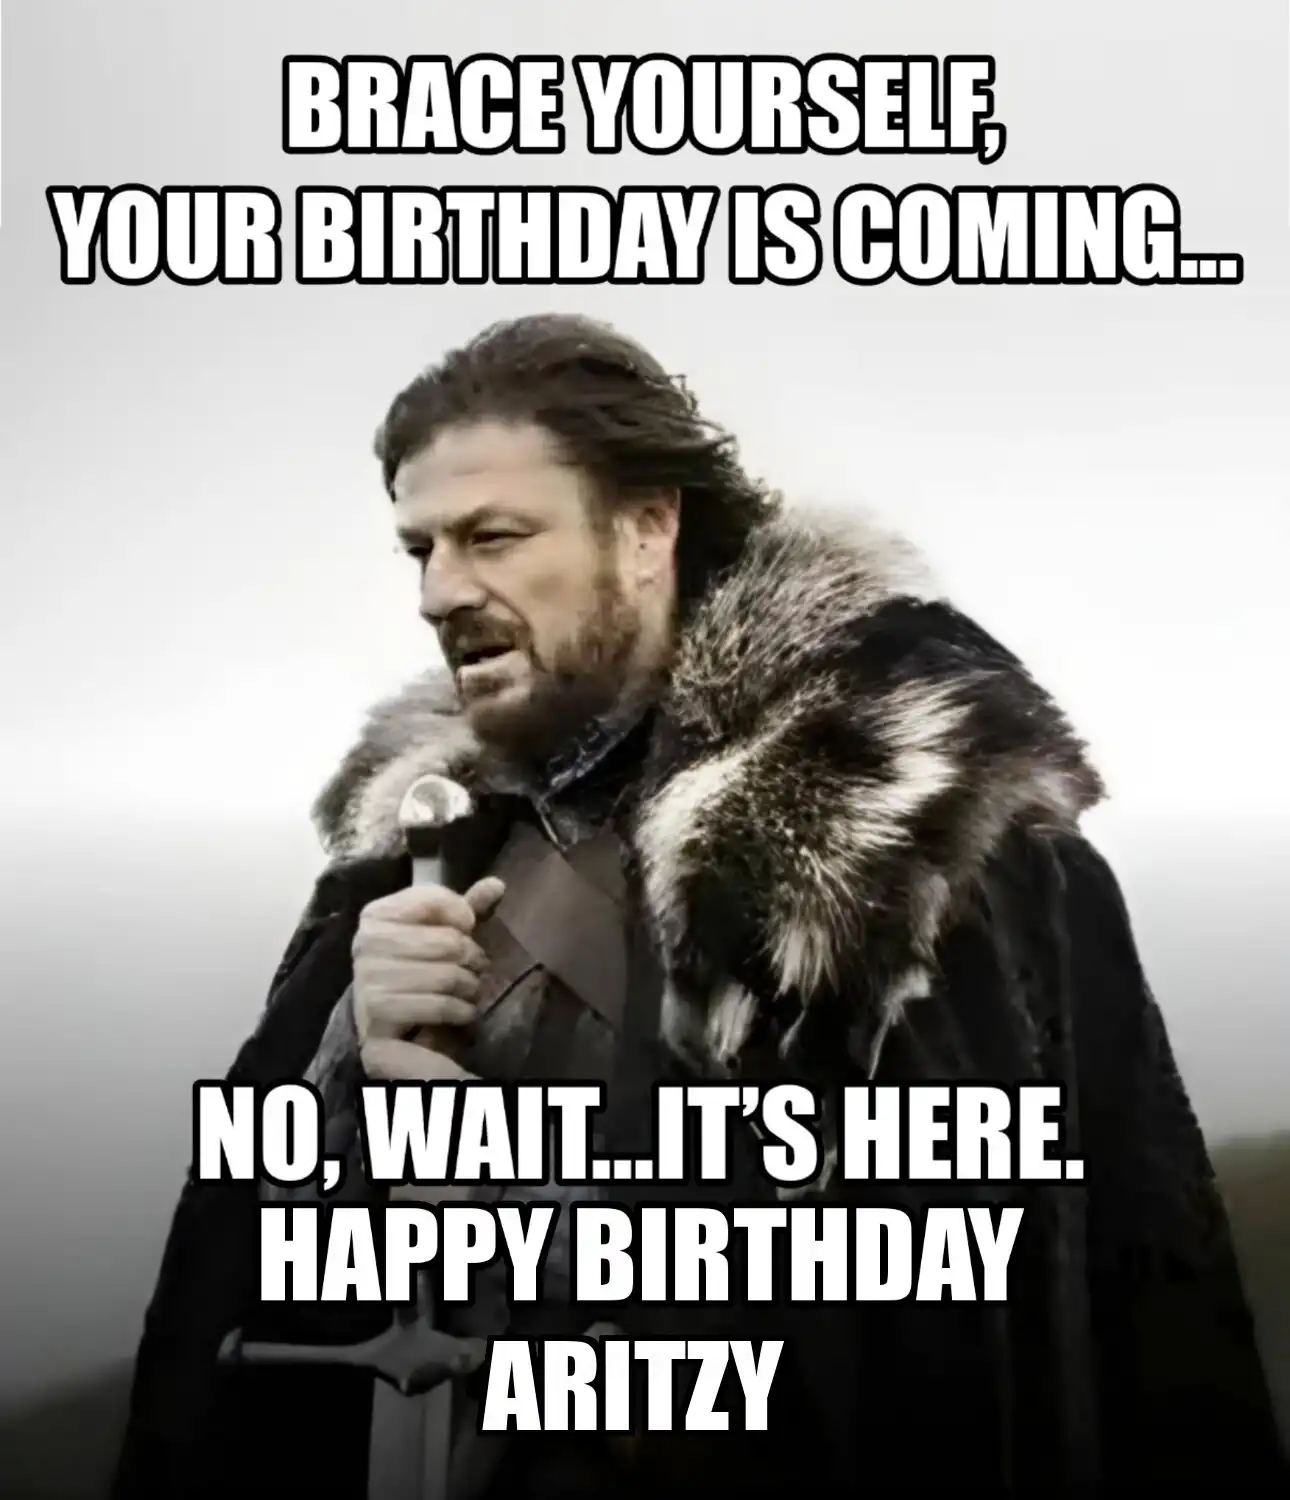 Happy Birthday Aritzy Brace Yourself Your Birthday Is Coming Meme